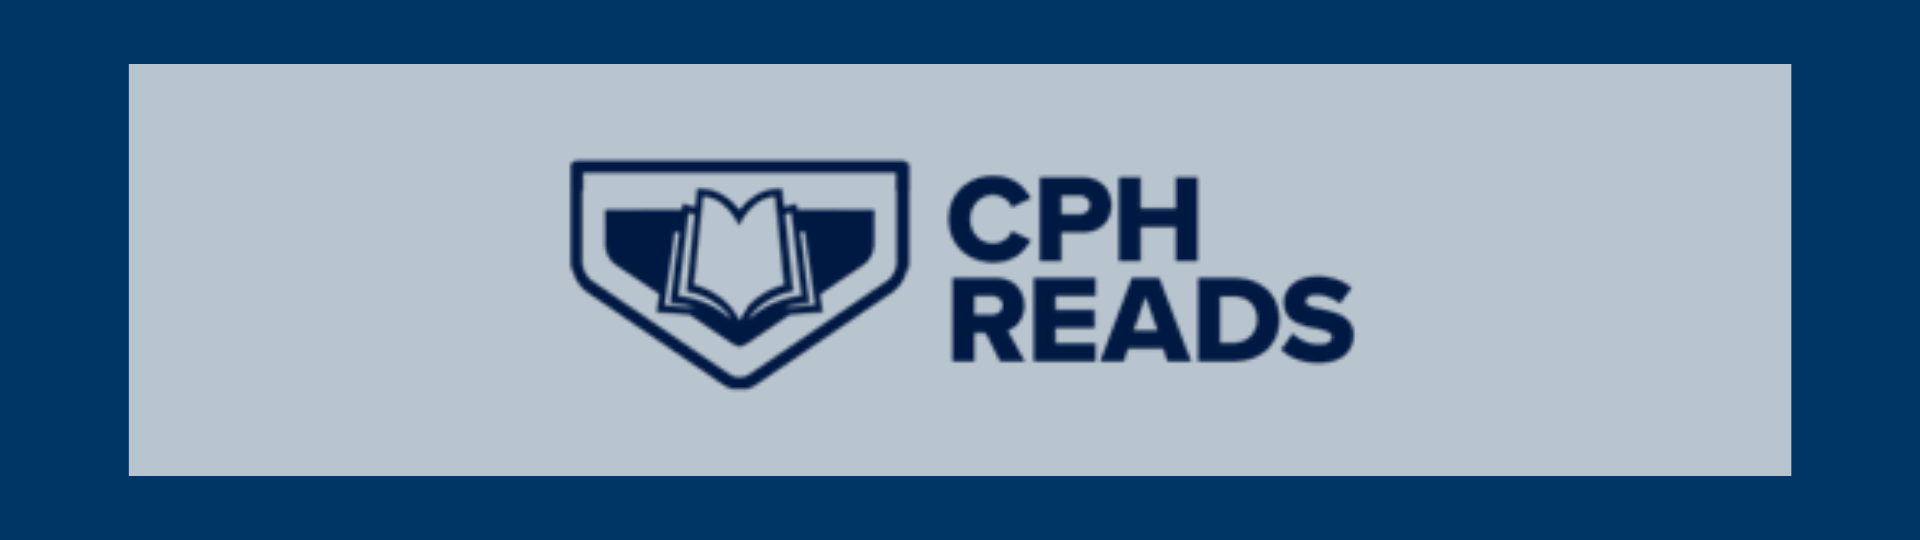 Press Release: Concordia Publishing House Launches Summer Reading Program for Young Readers